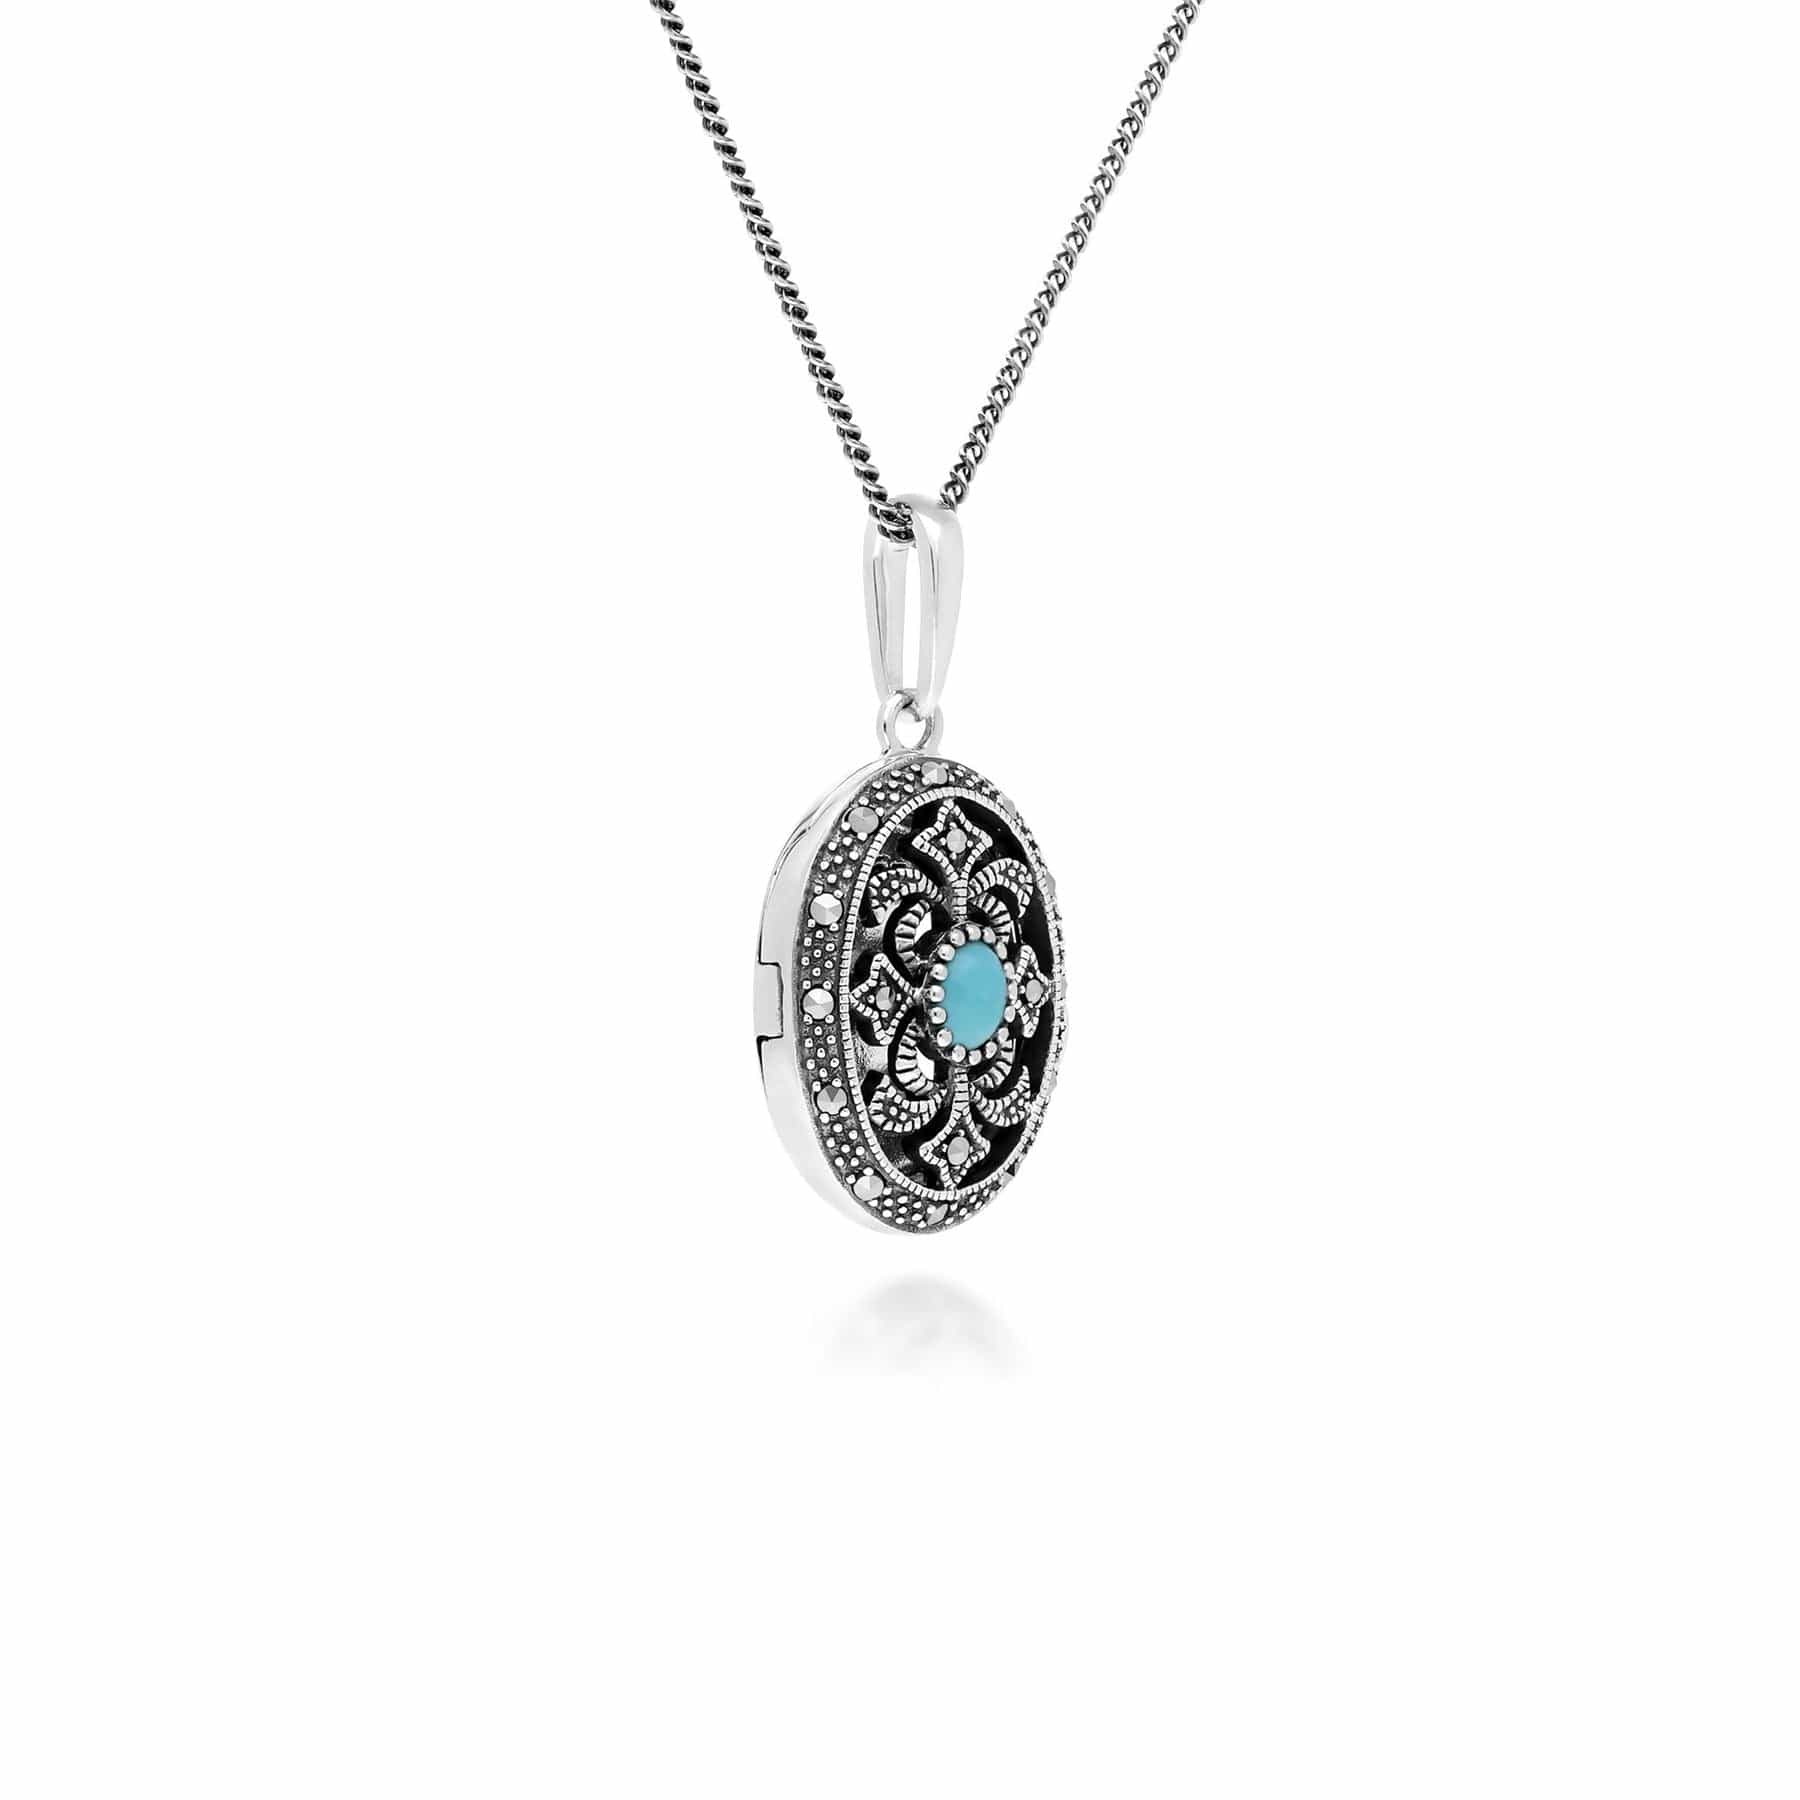 Art Nouveau Style Oval Turquoise & Marcasite Locket Necklace in 925 Sterling Silver - Gemondo